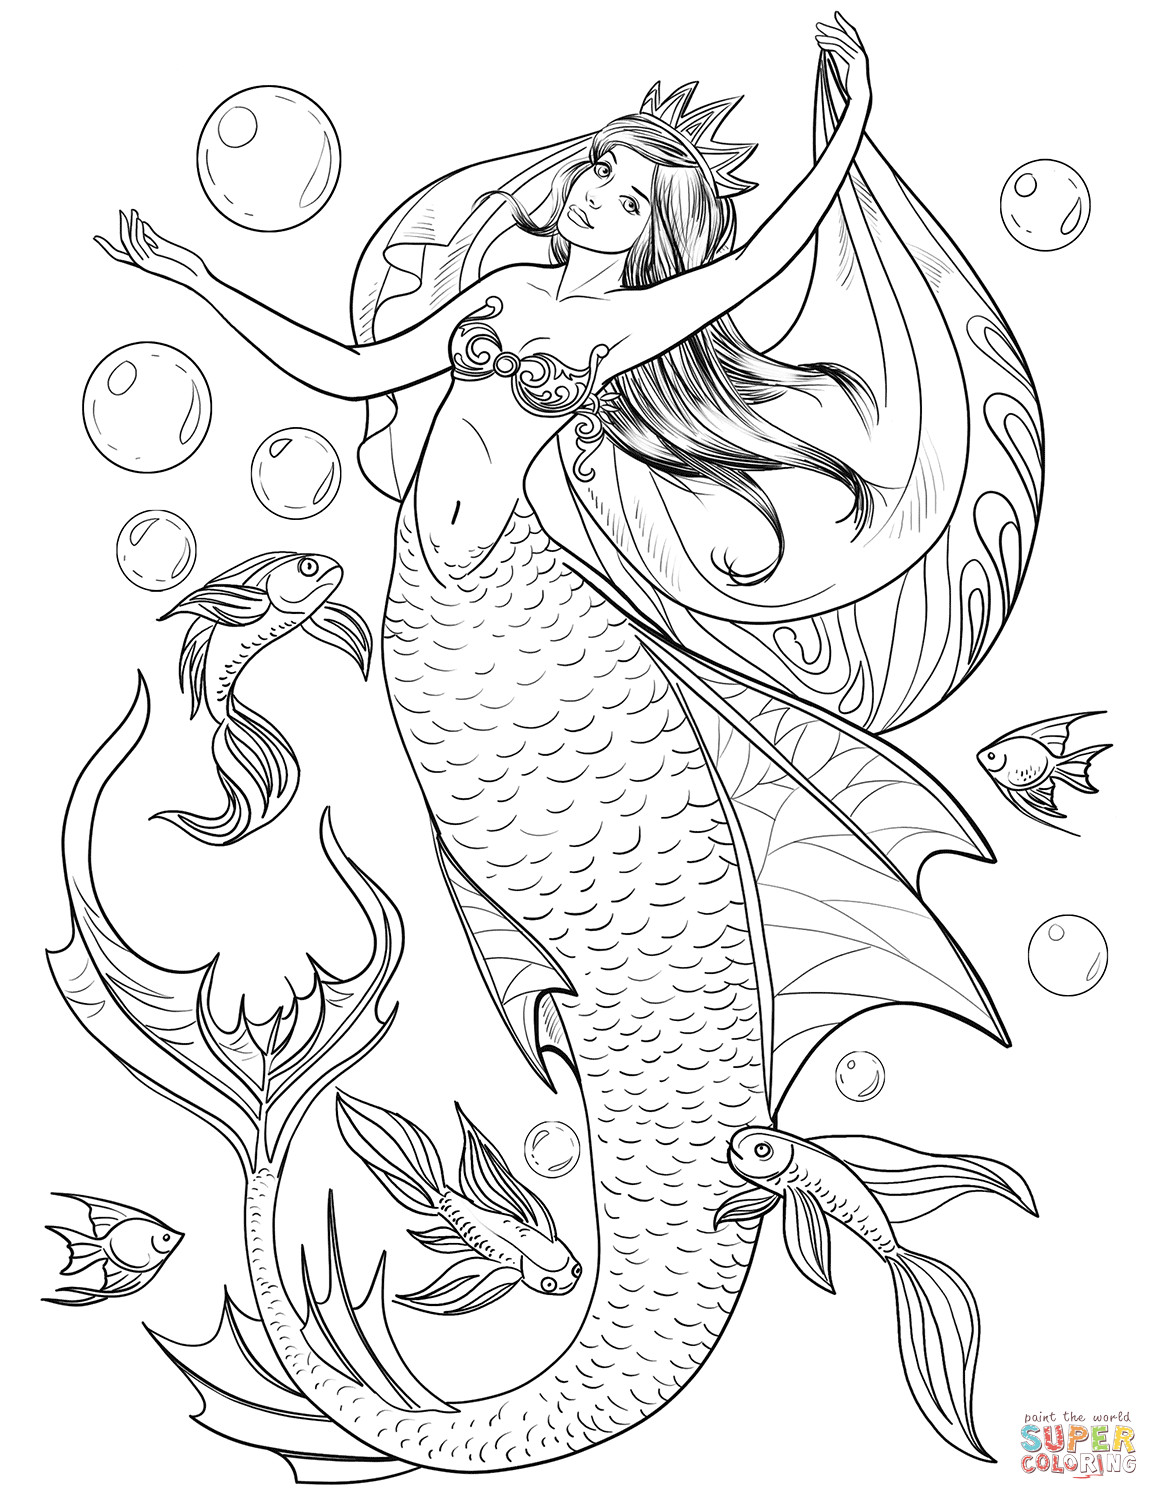 the-best-ideas-for-realistic-mermaid-coloring-pages-for-adults-home-family-style-and-art-ideas